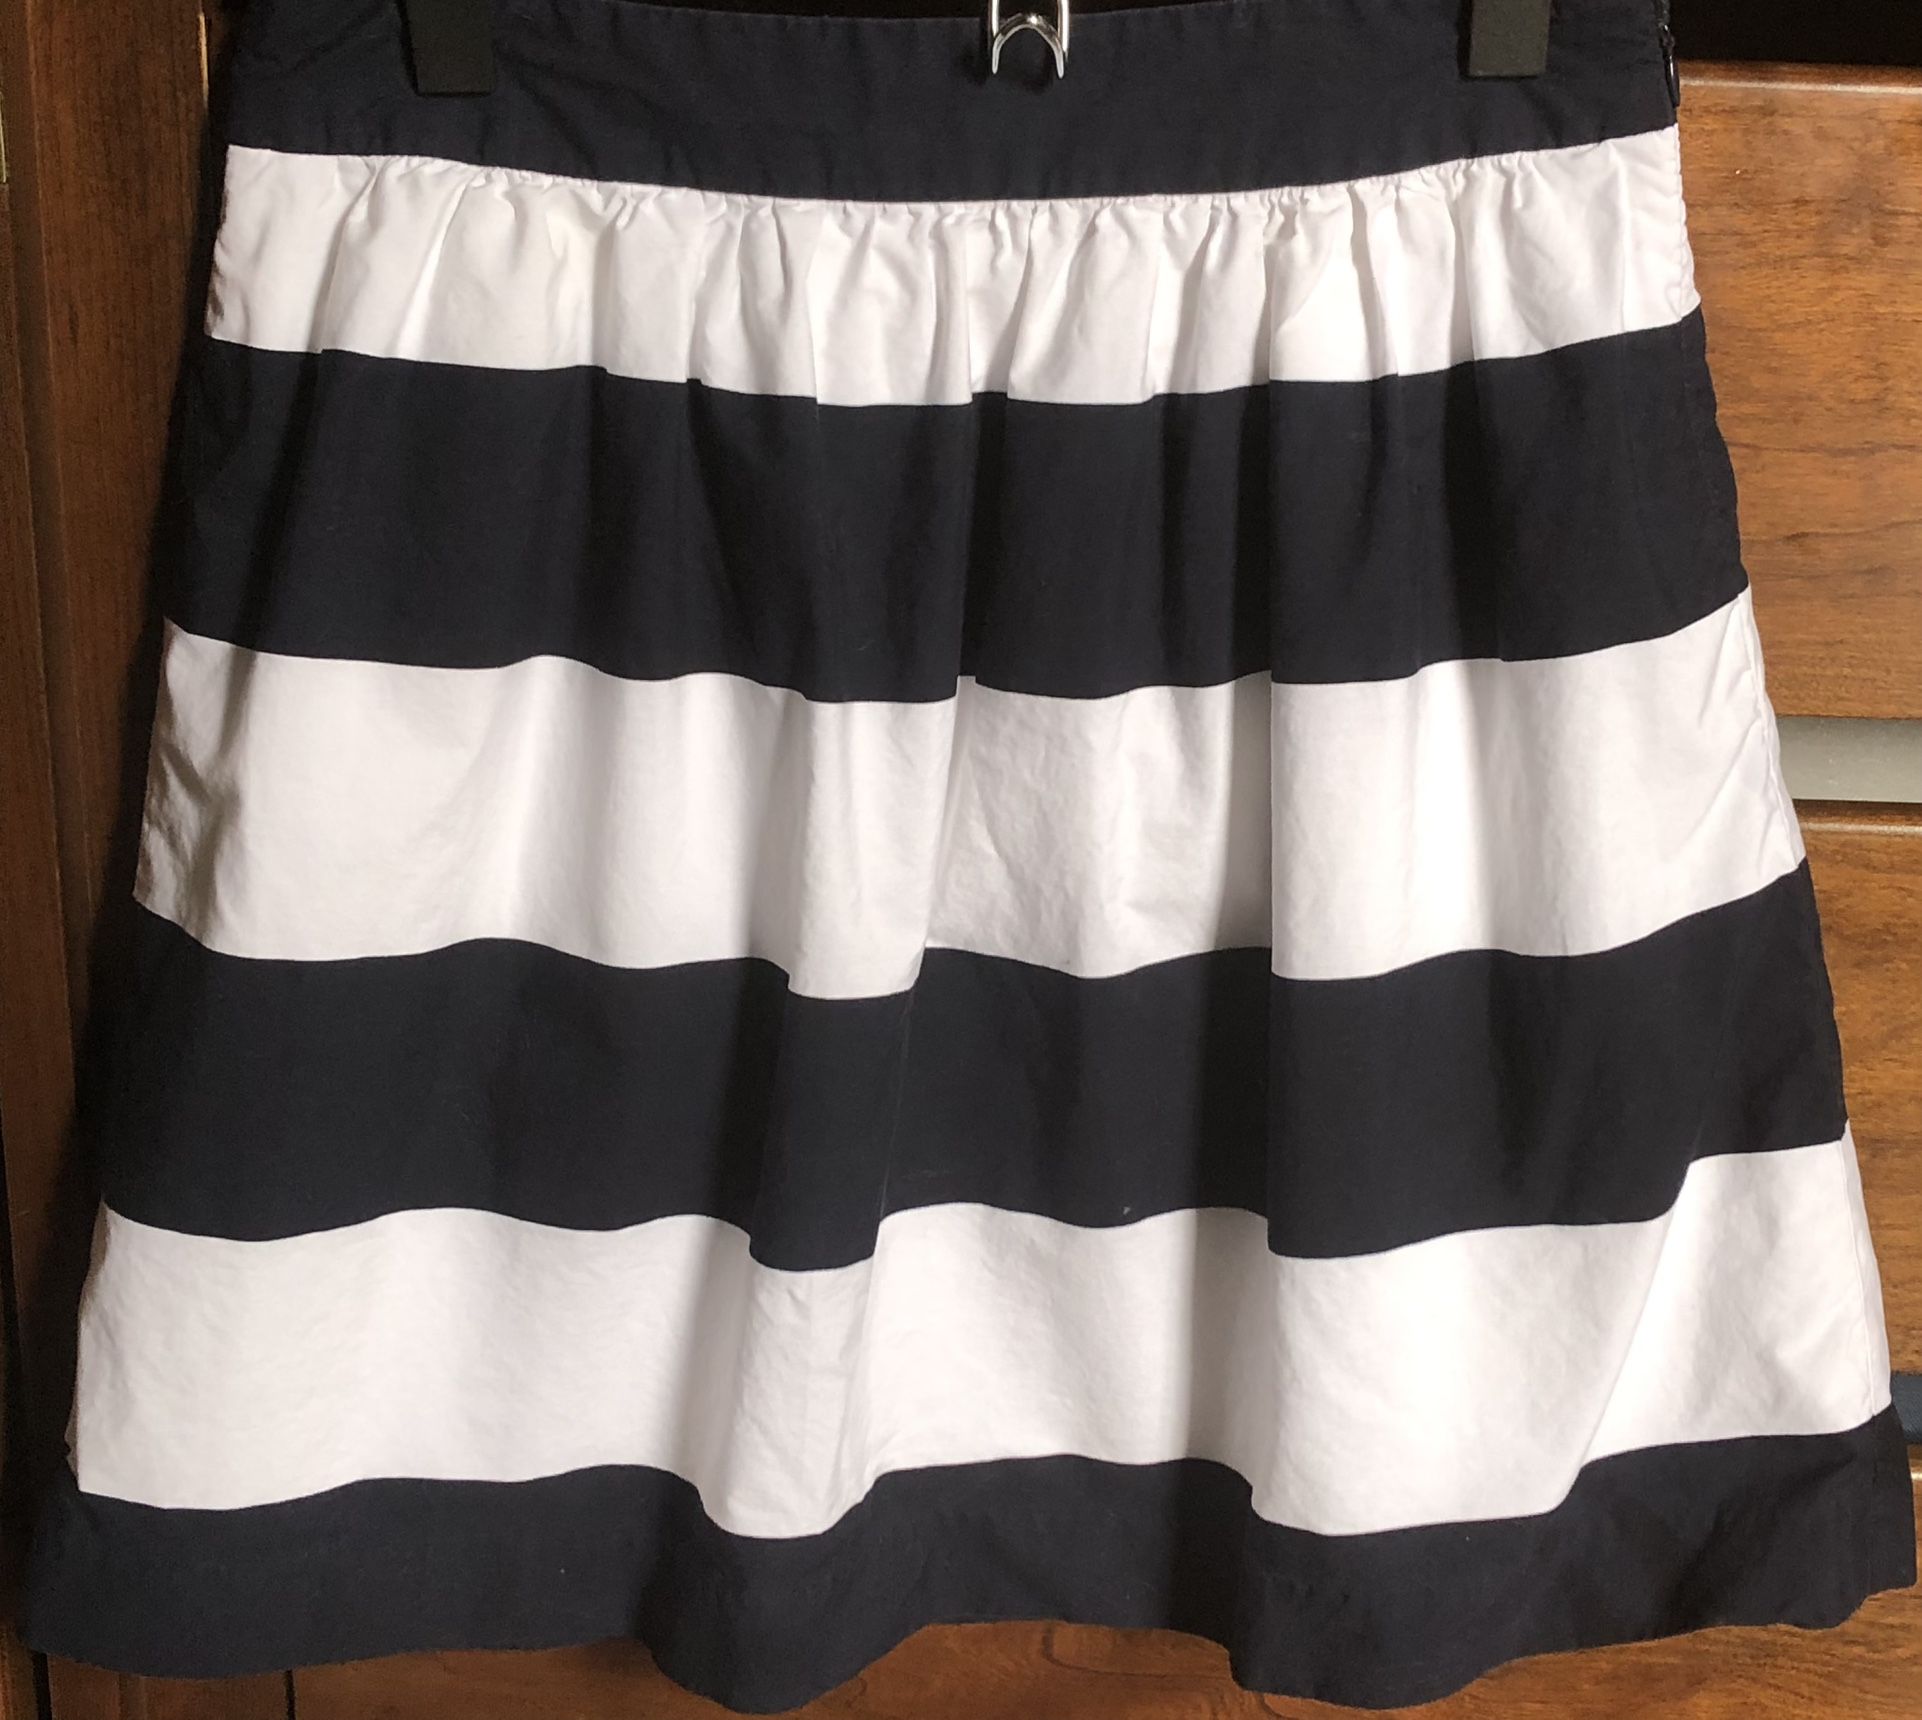 Like New, Navy Blue and White Solid Striped Cotton Skirt from Banana Republic (size 2)